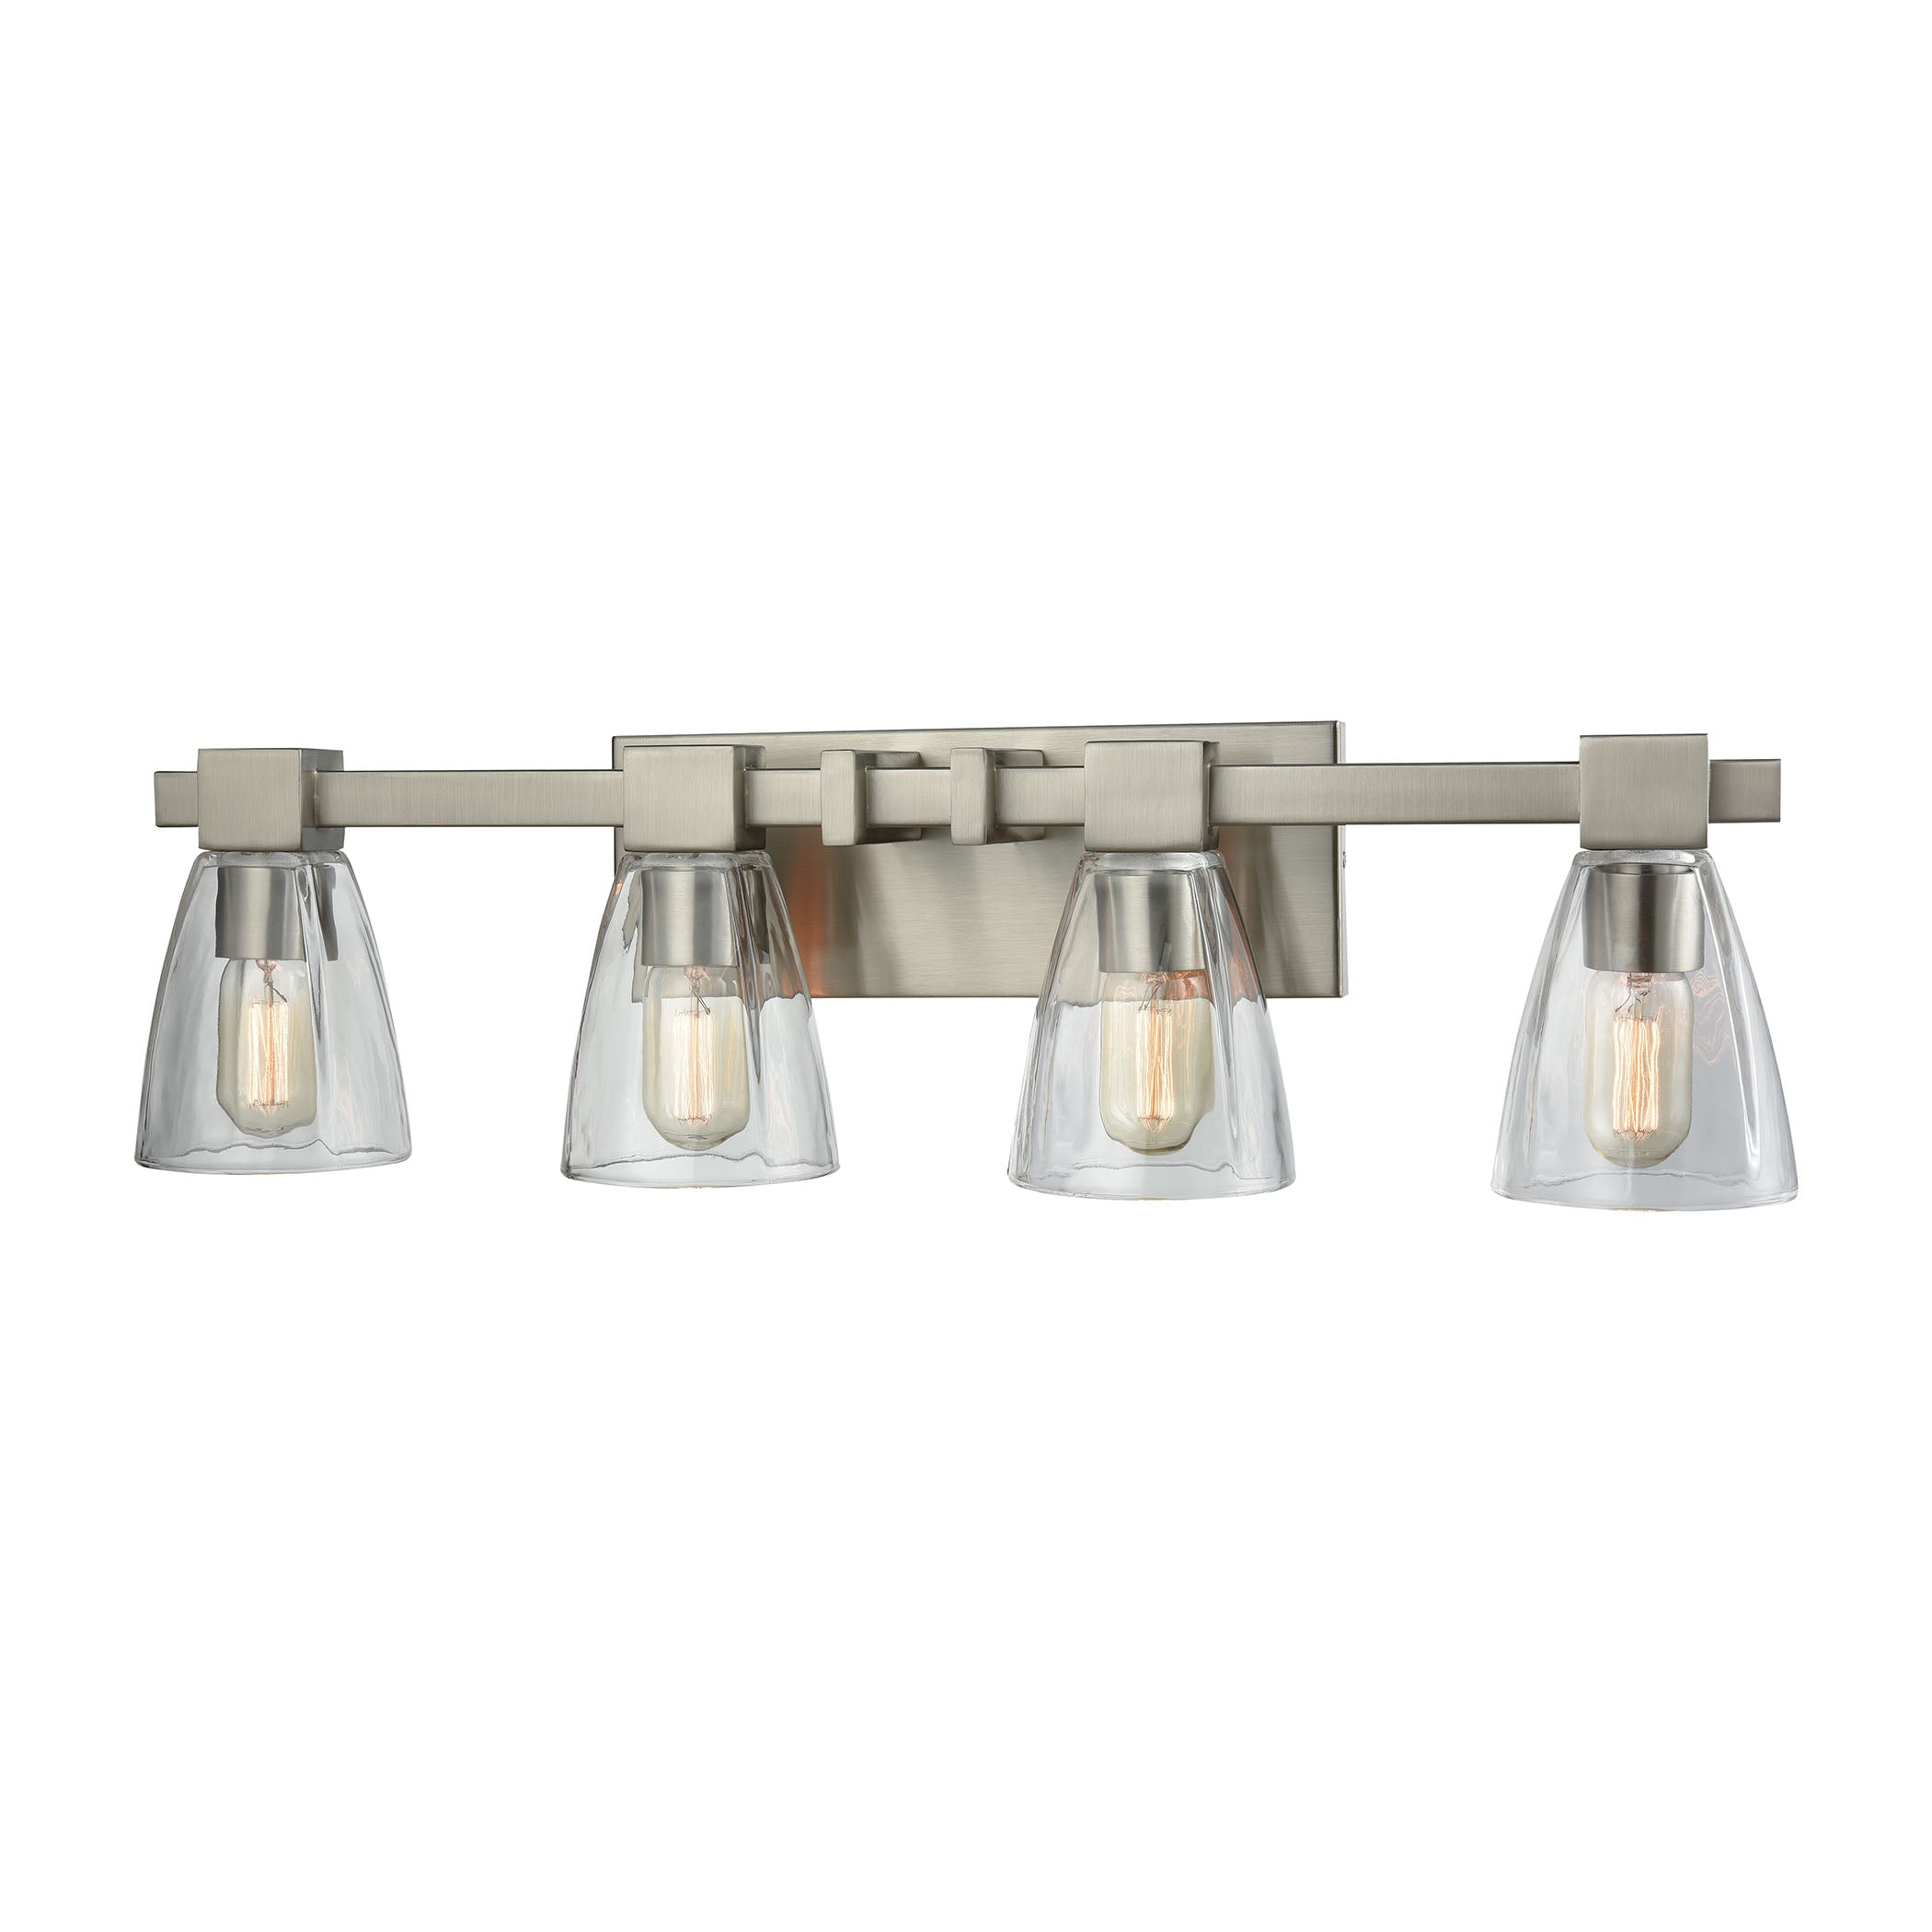 ELK Lighting 11983/4 Ensley 4-Light Vanity Lamp in Satin Nickel with Square-to-Round Clear Glass